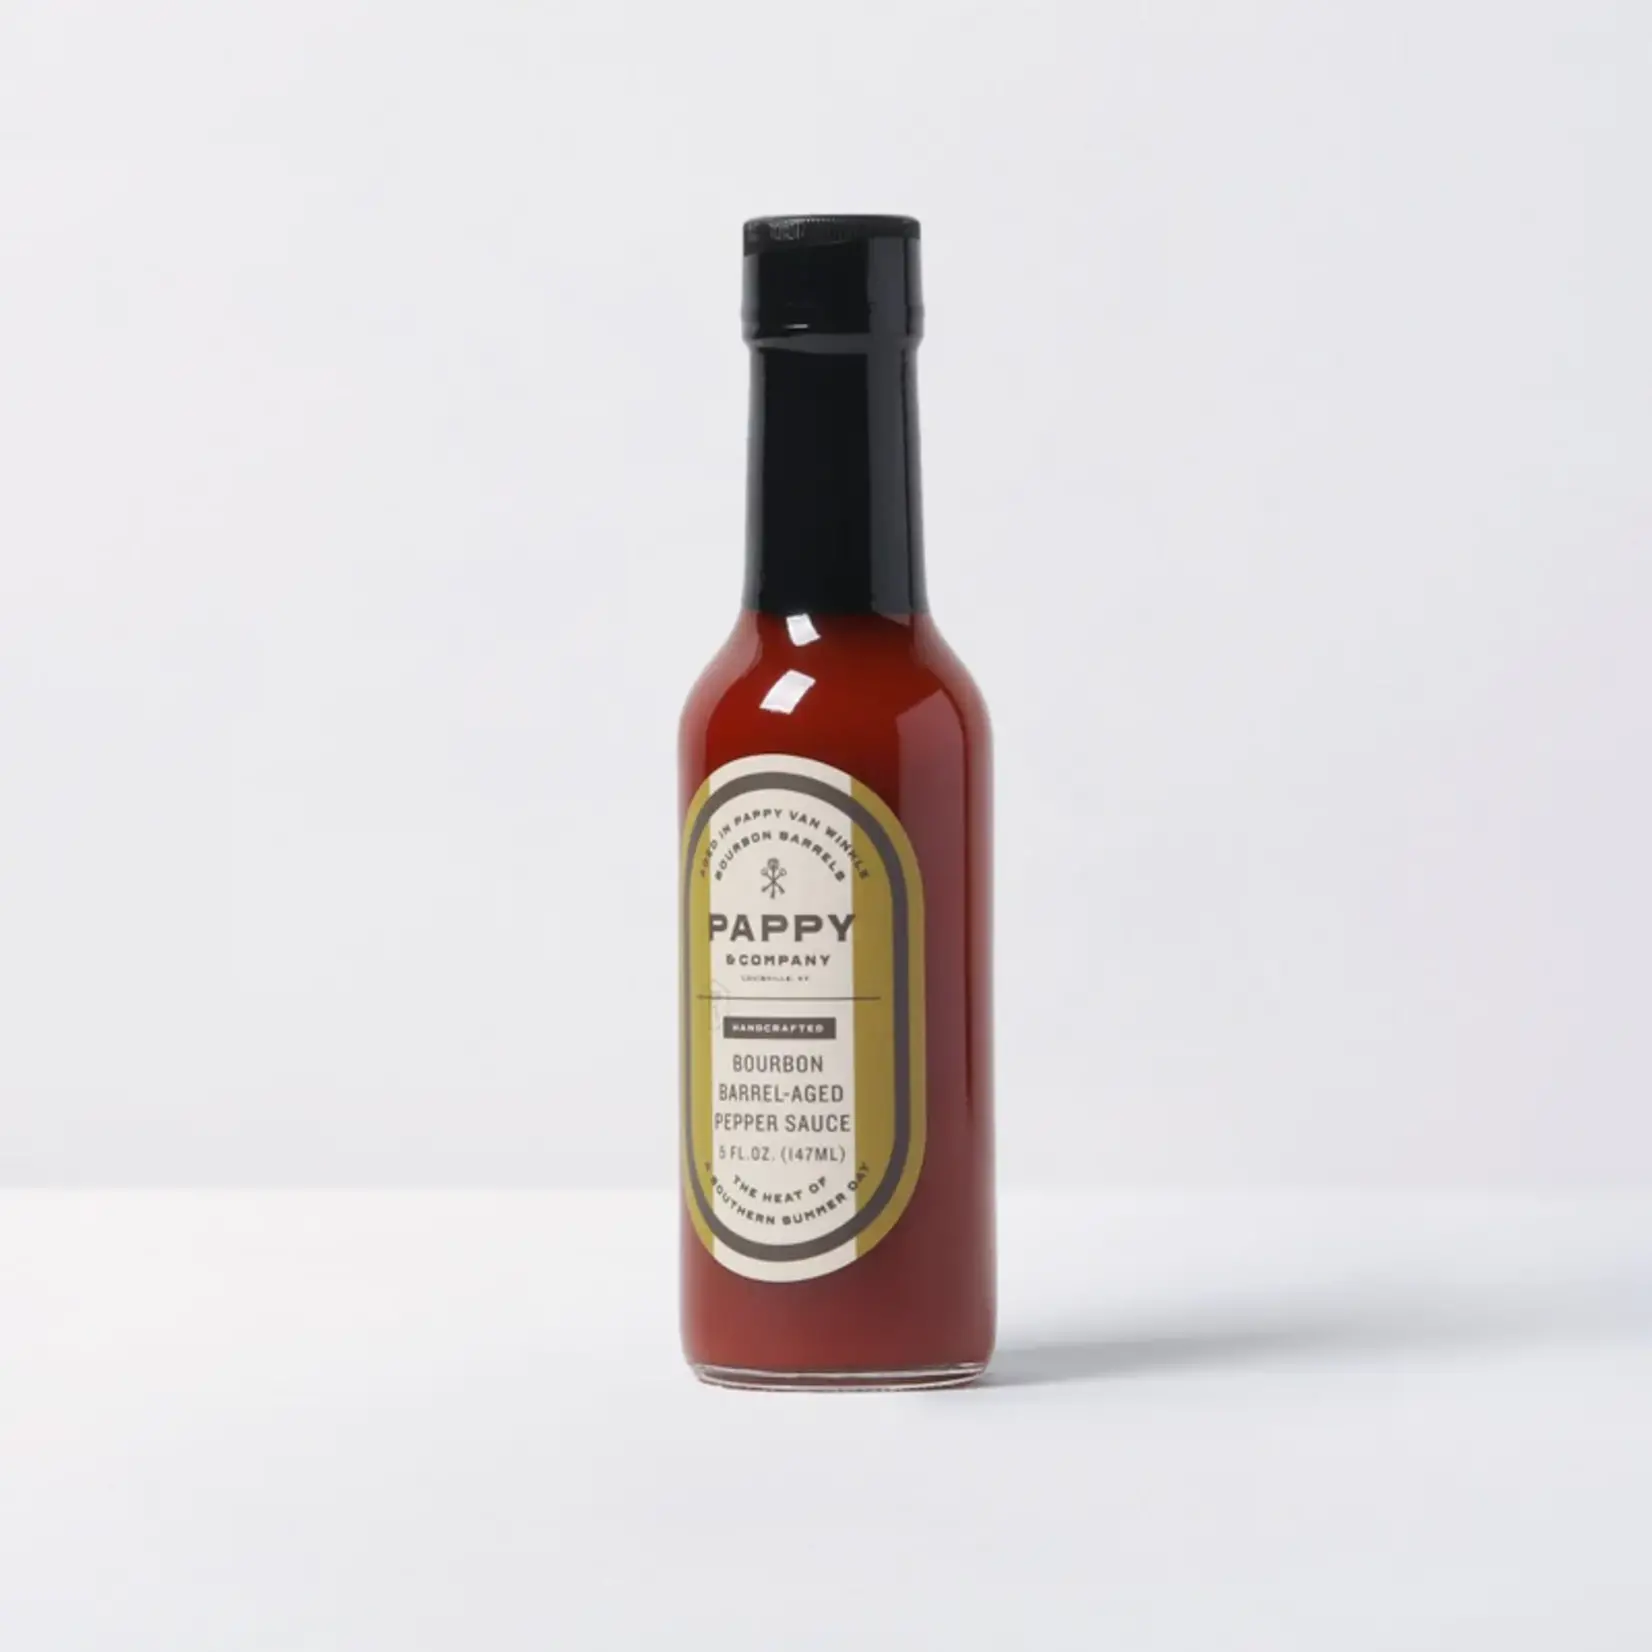 Pappy & Company Bourbon Barrel-Aged Pepper Sauce